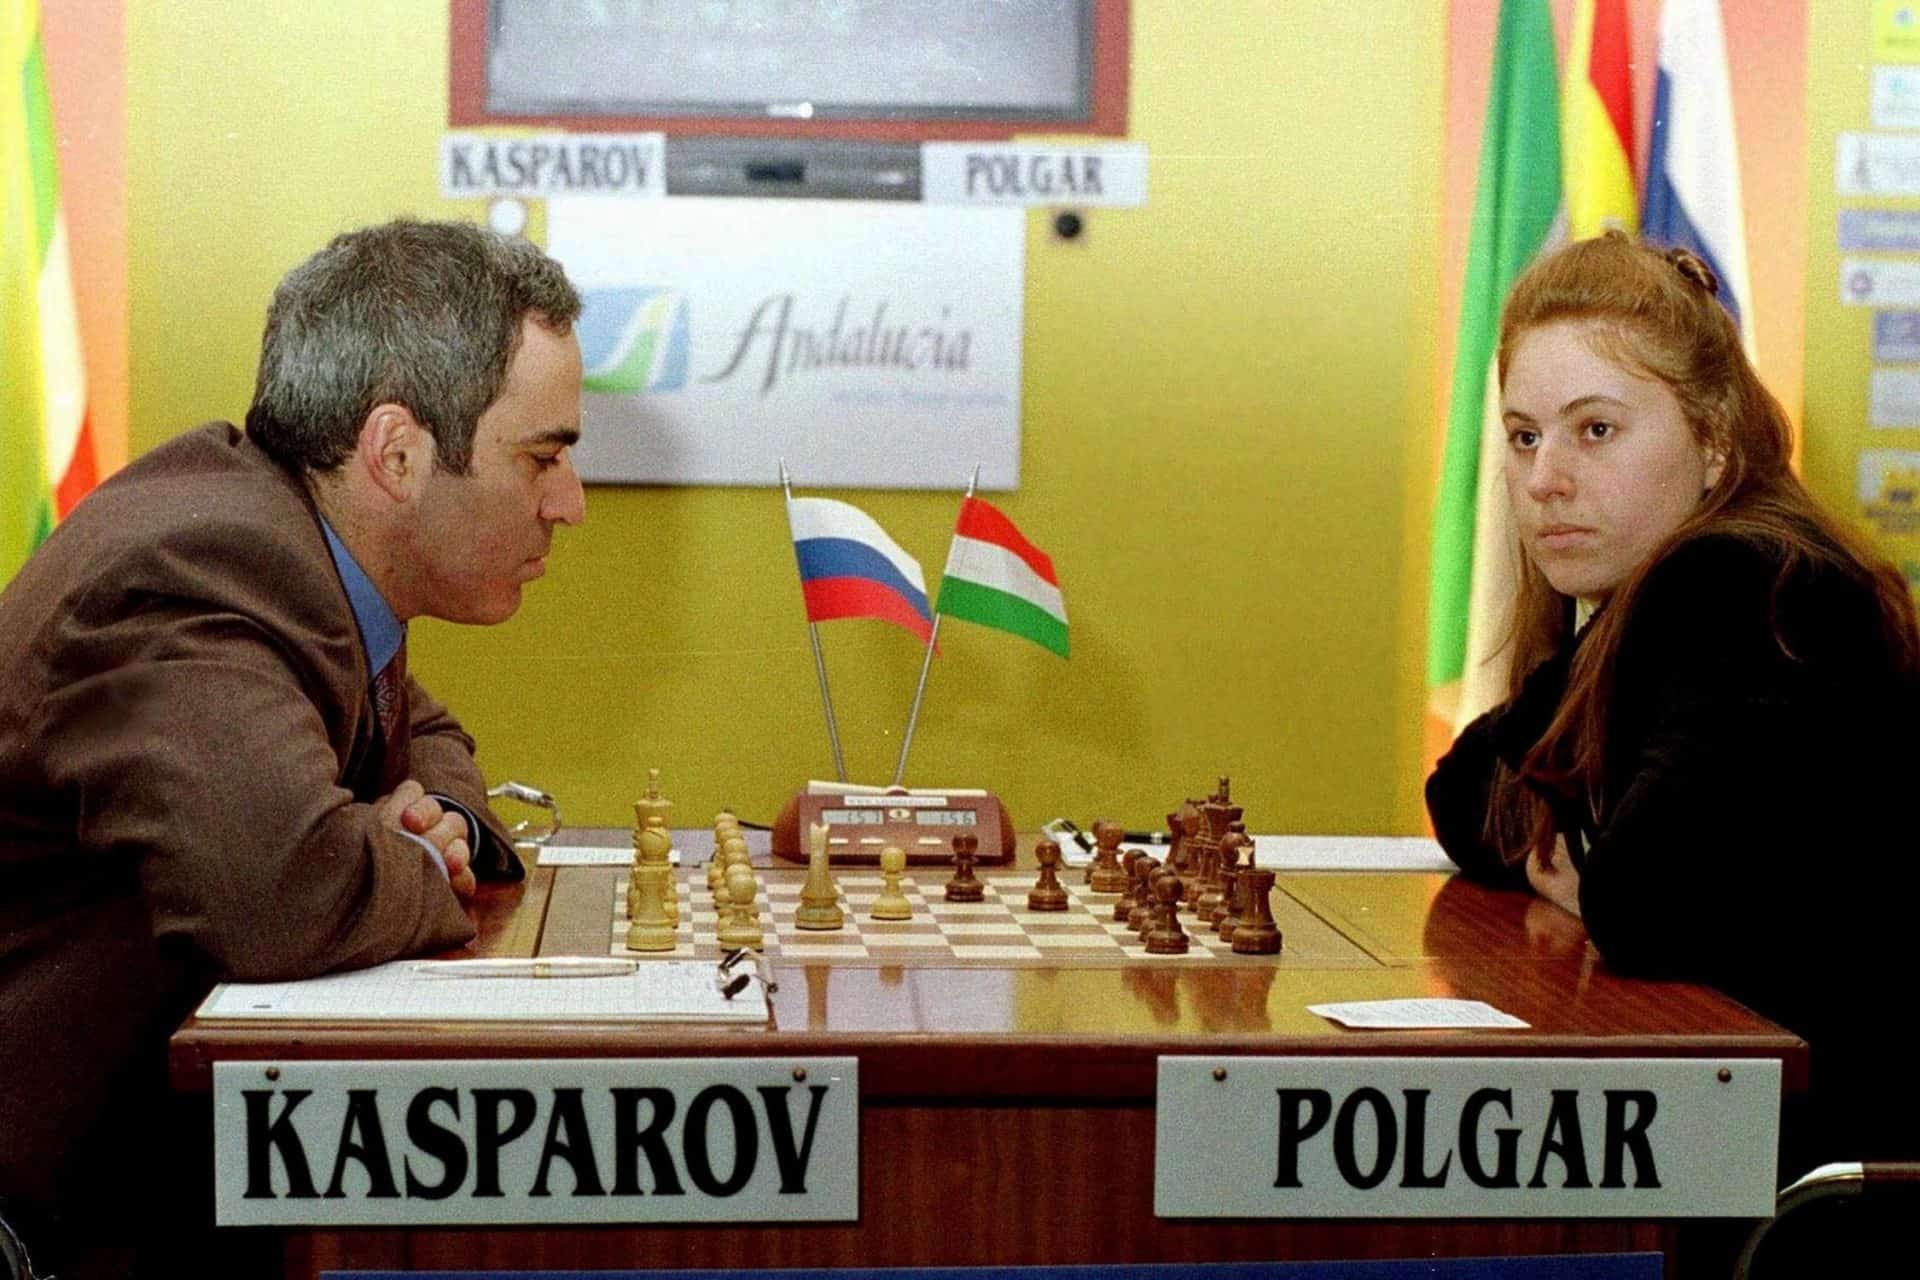 Why are Chess Championships Separated by Gender?